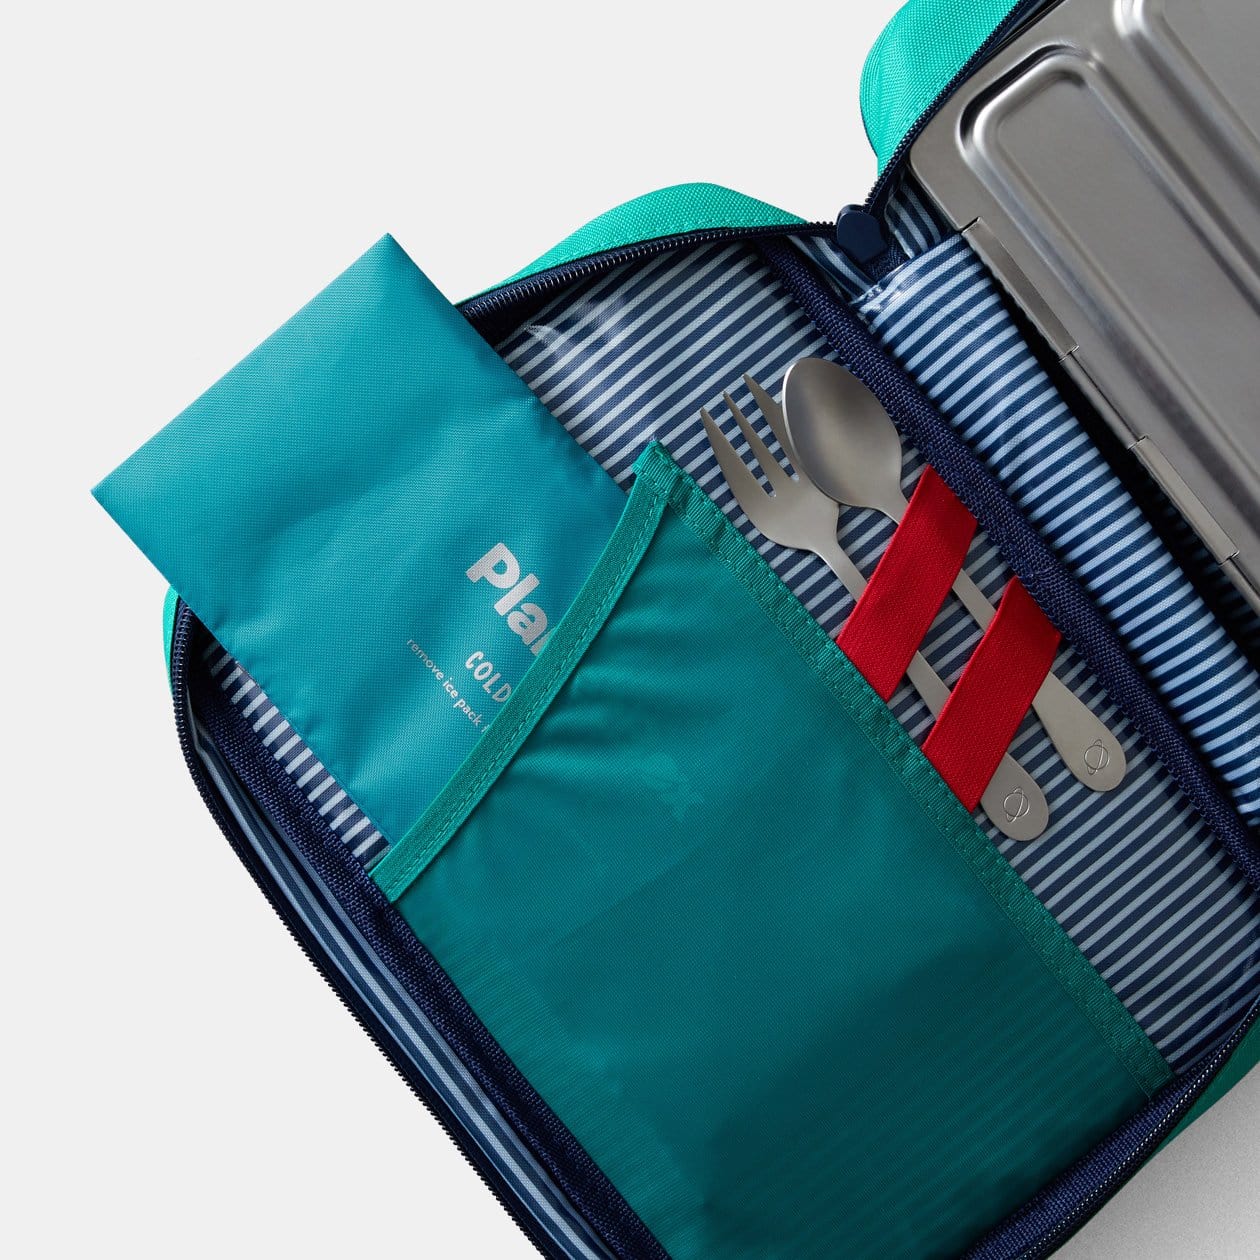 PlanetBox ColdKit Ice Pack for keeping your lunch cold